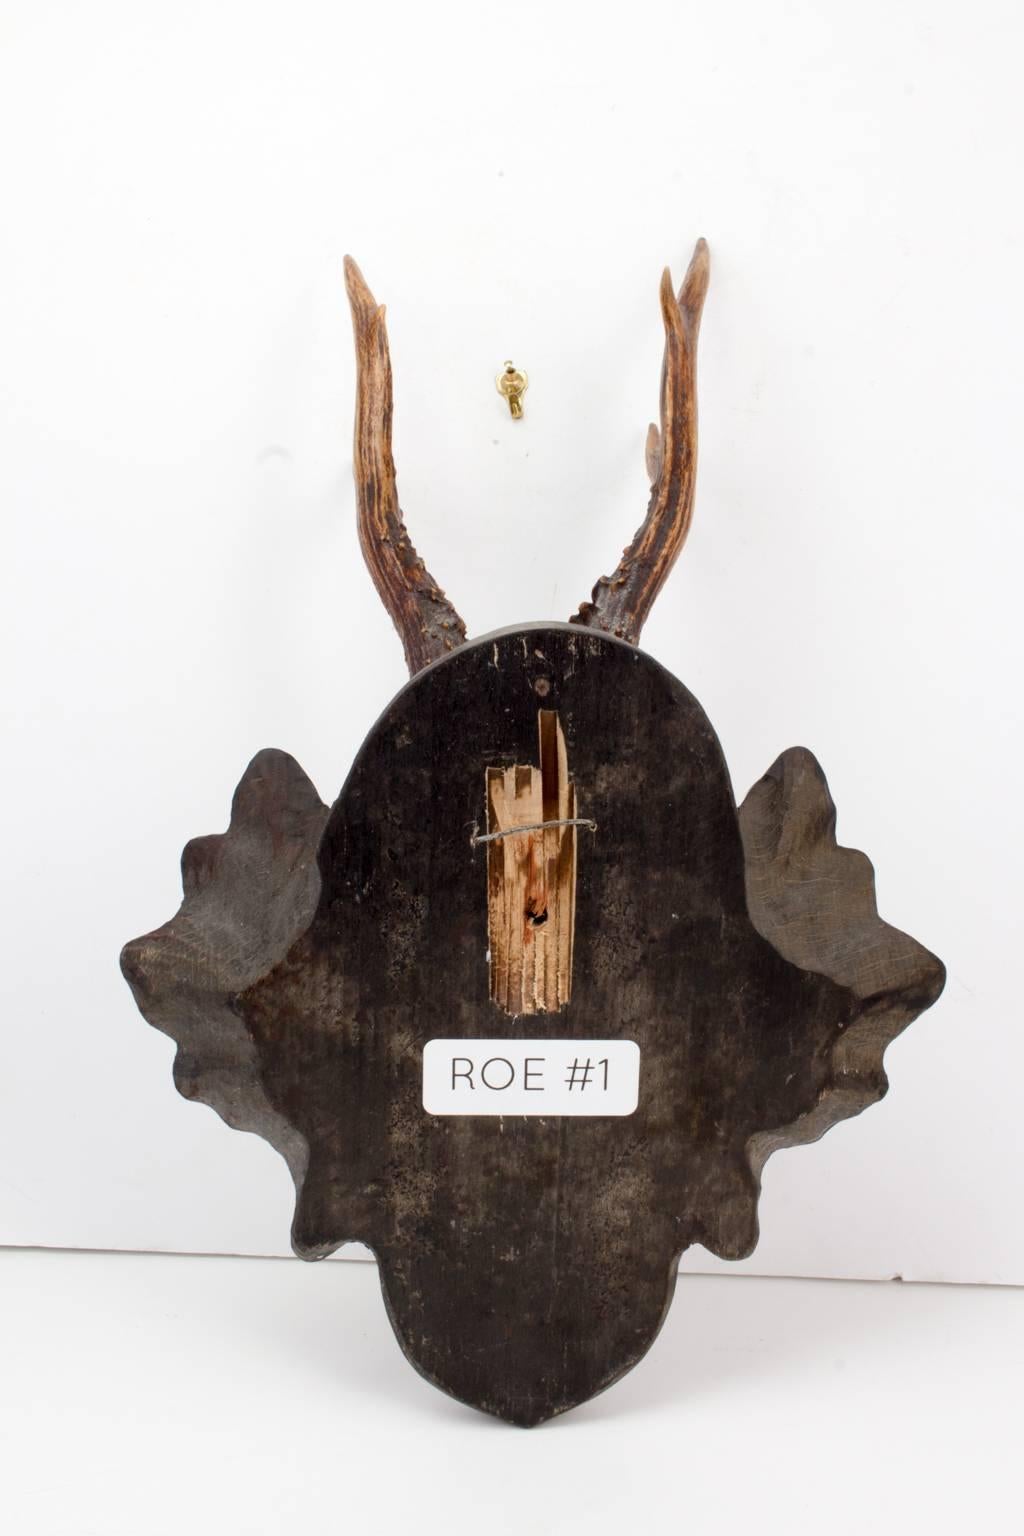 This hunting trophy originated from the Eckartsau castle of Emperor Franz Joseph in the Southern Austrian Alps. Eckartsau was a favorite hunting schloss of the Habsburg family. 

The Heraldic seal appears to be a crest of German “Free City States”